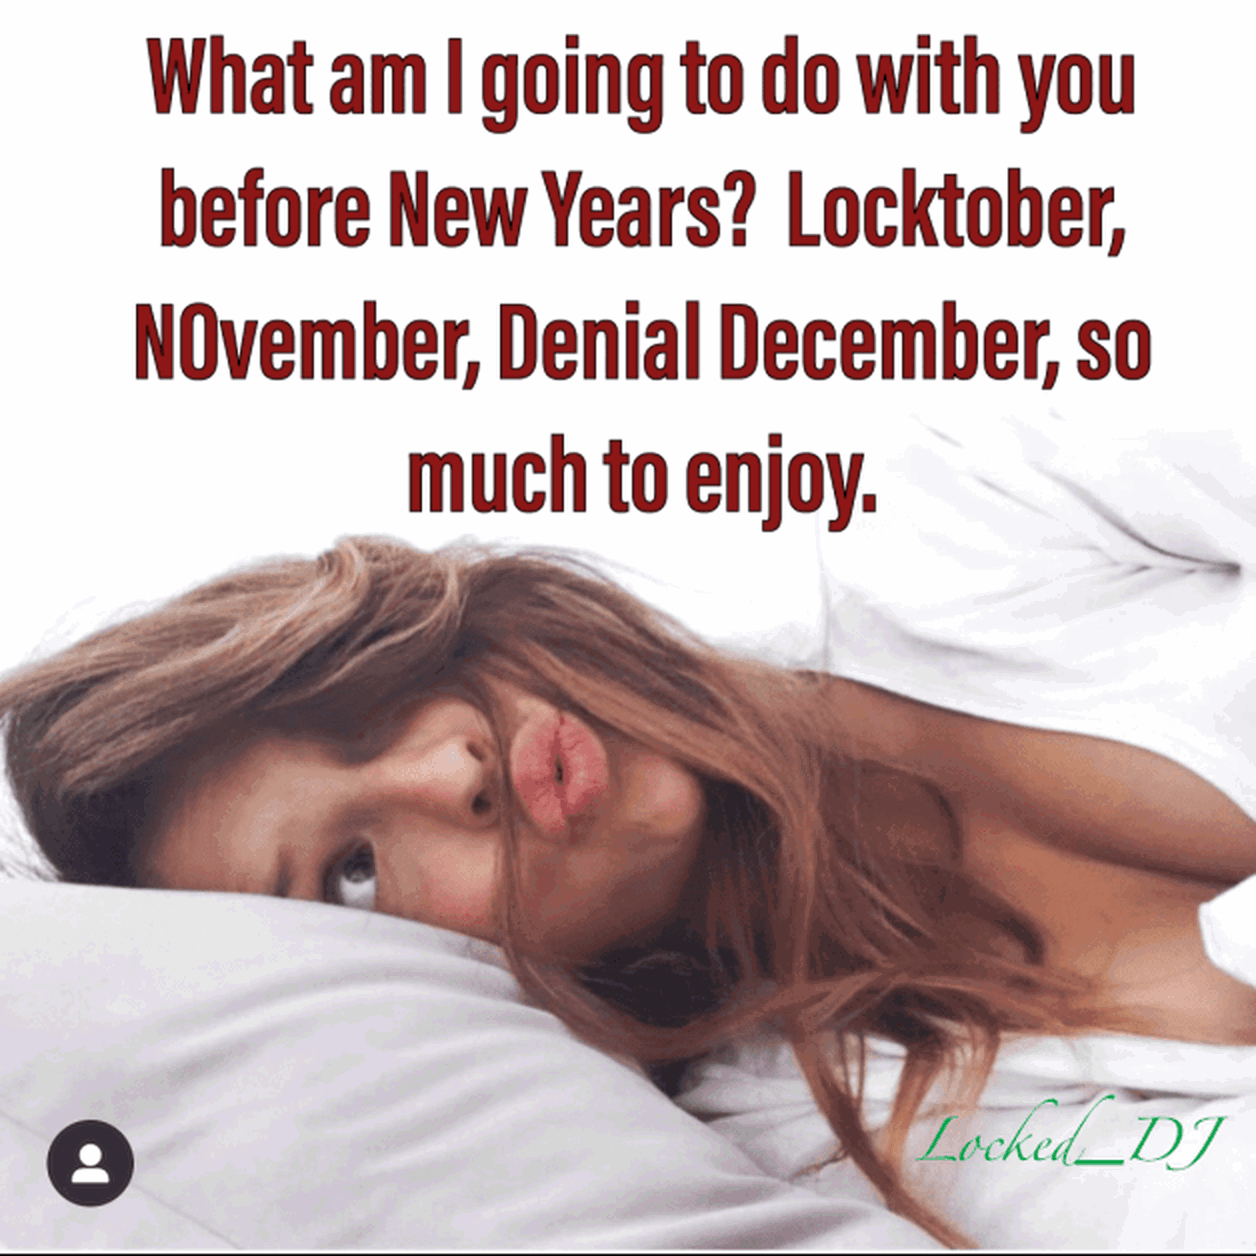 Photo by Locked.DJChastity with the username @Locked.DJChastity,  September 11, 2021 at 3:28 PM. The post is about the topic Male Chastity and the text says 'So many days left this year for you to think about. 
         #chastity, #malechastity, #chastitymansion, #cagedcock, #cagedcocks, #cockcage, #flr, #chastitycage, #chastityslave, #keyholder, #malechastitydevice, #chastitykeyholder, #peniscage, #balltrap,..'